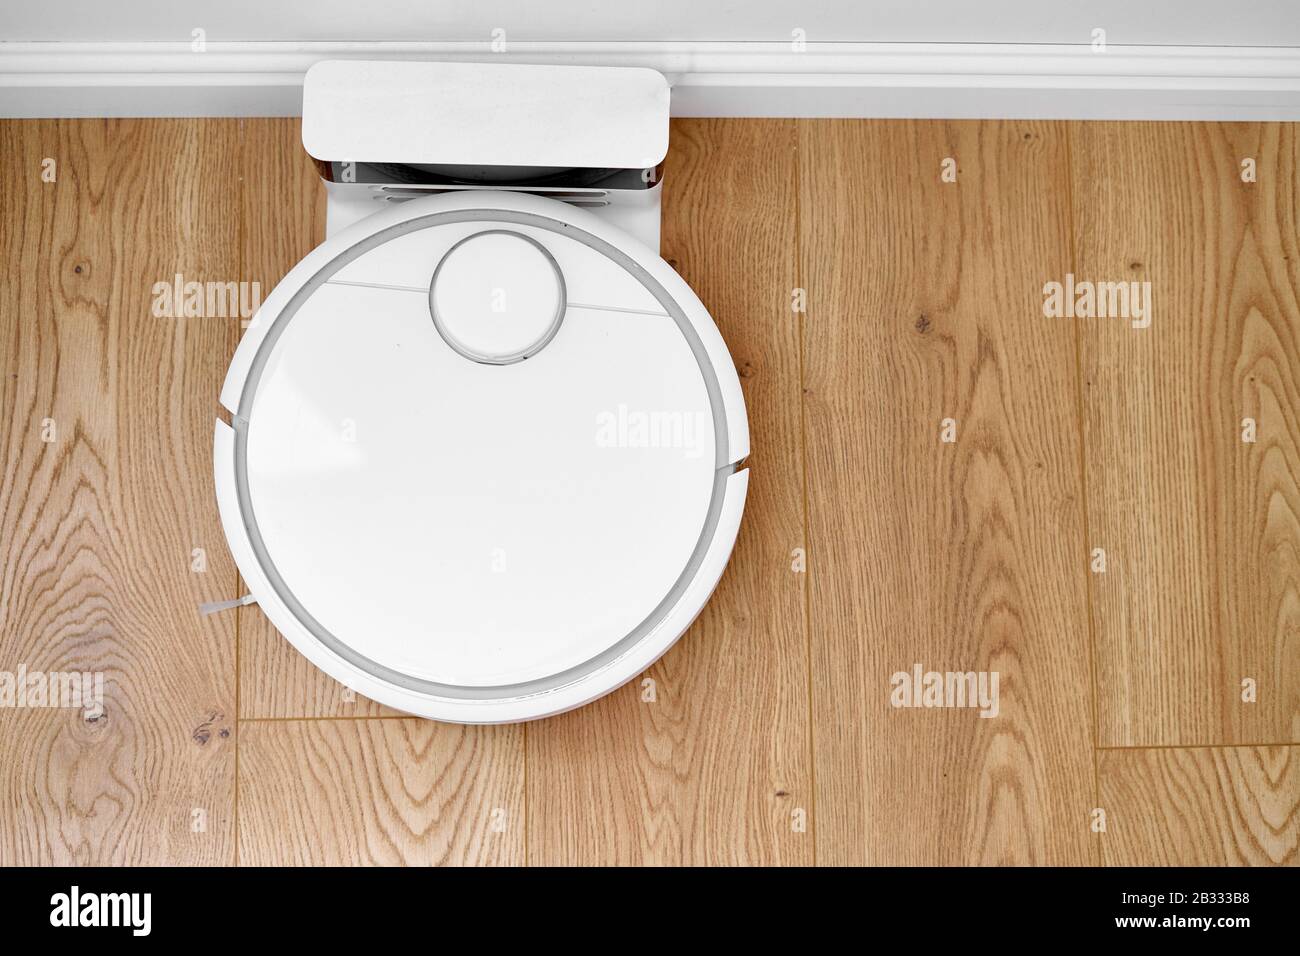 Smart Home Concept Charging Automatic Robot Vacuum Cleaner Stock